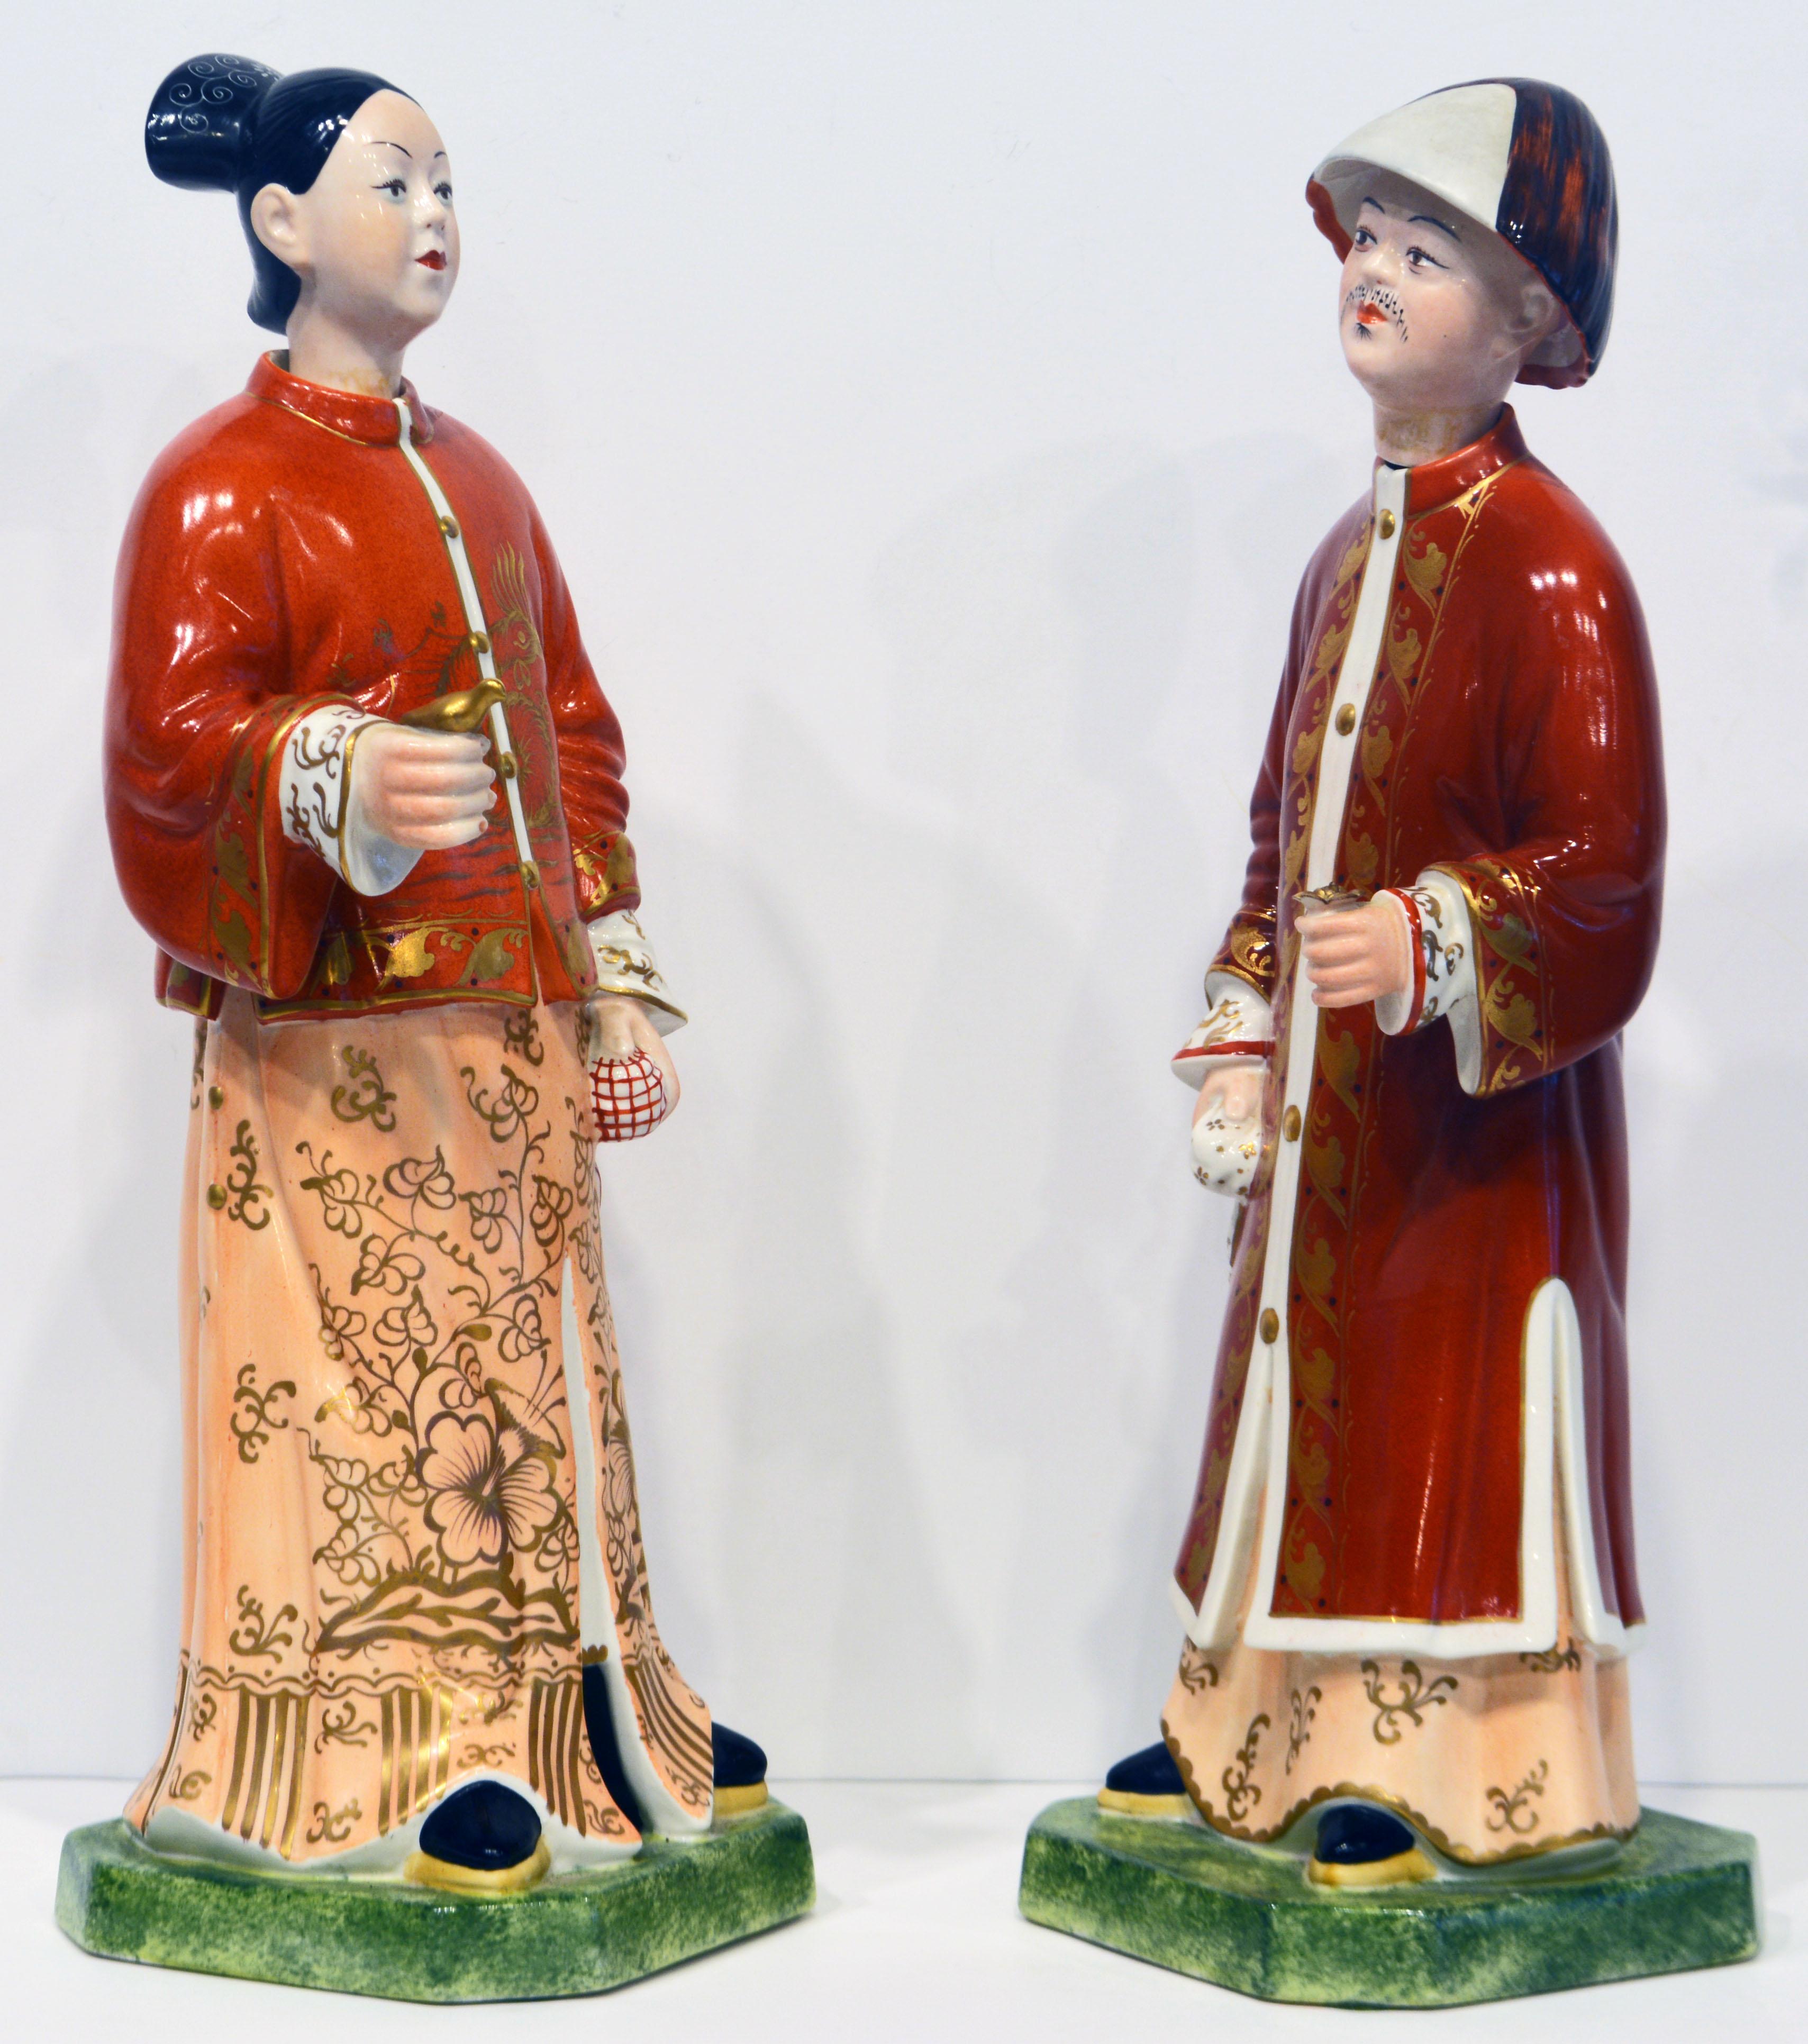 Glazed Chinese Export Style Porcelain Nodding Head Mandarins by Mottahedeh, Italy, Pair